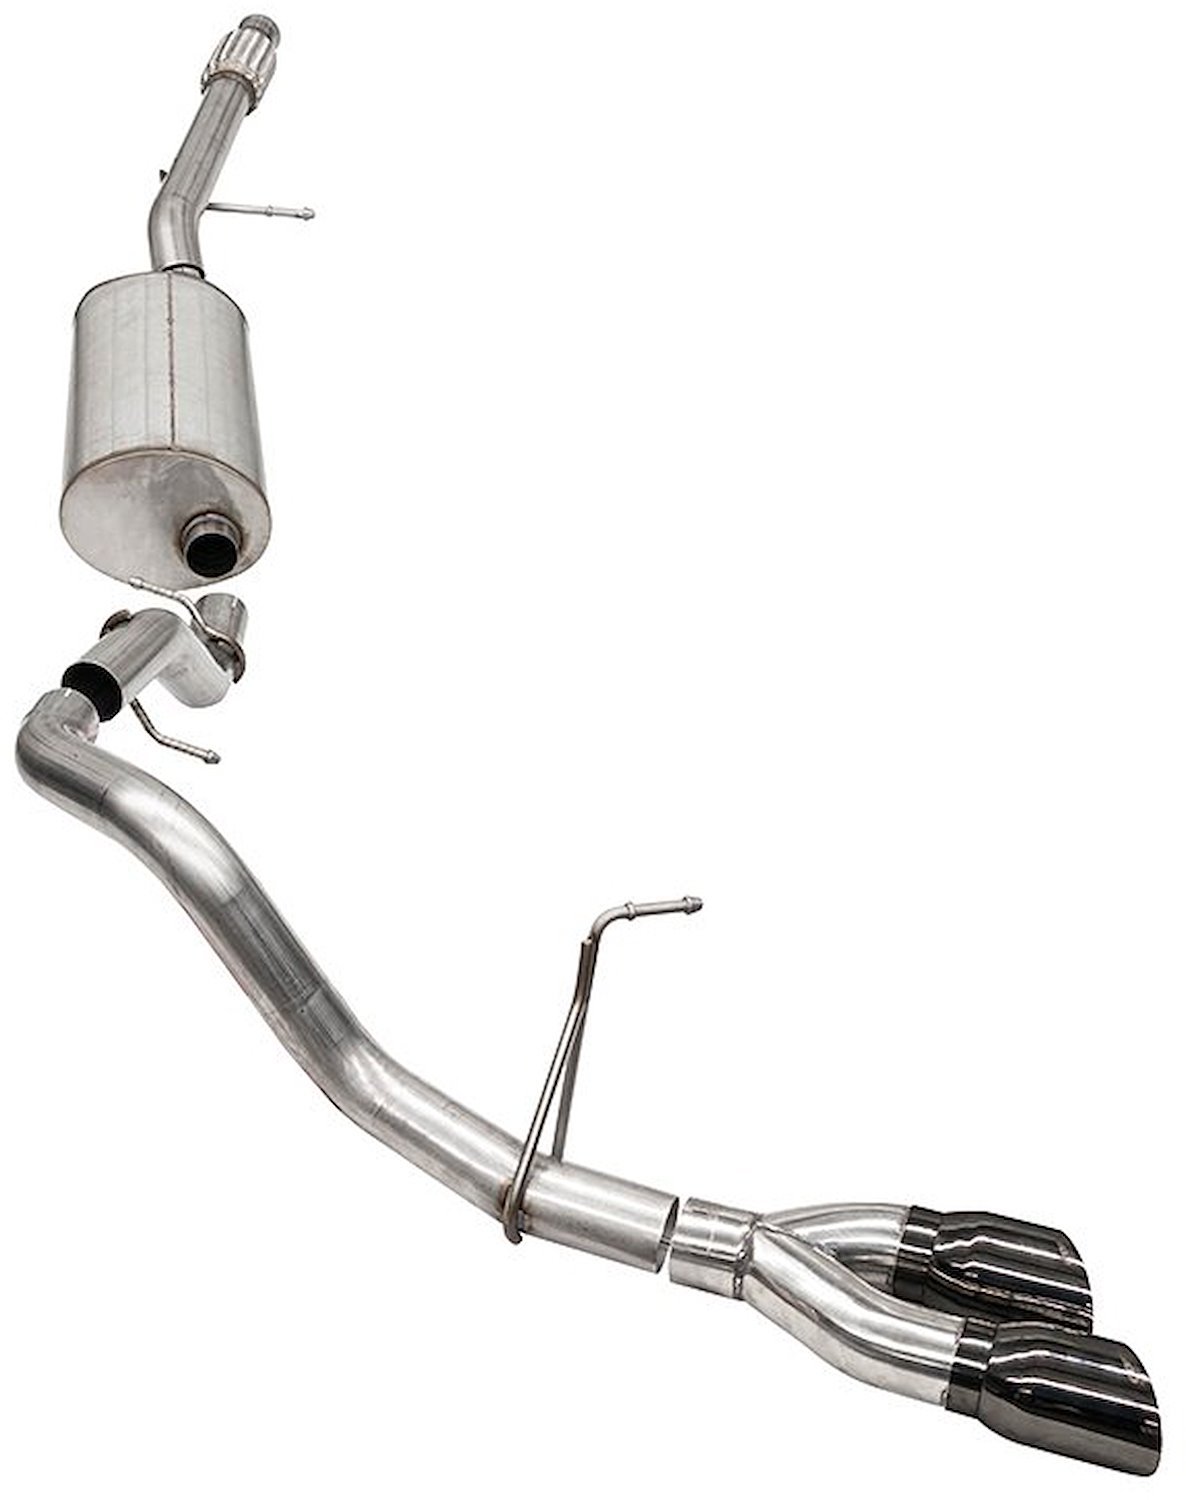 Sport Cat-Back Exhaust System fits Select Late-Model Chevy Suburban 5.3L V8 - Black Tip